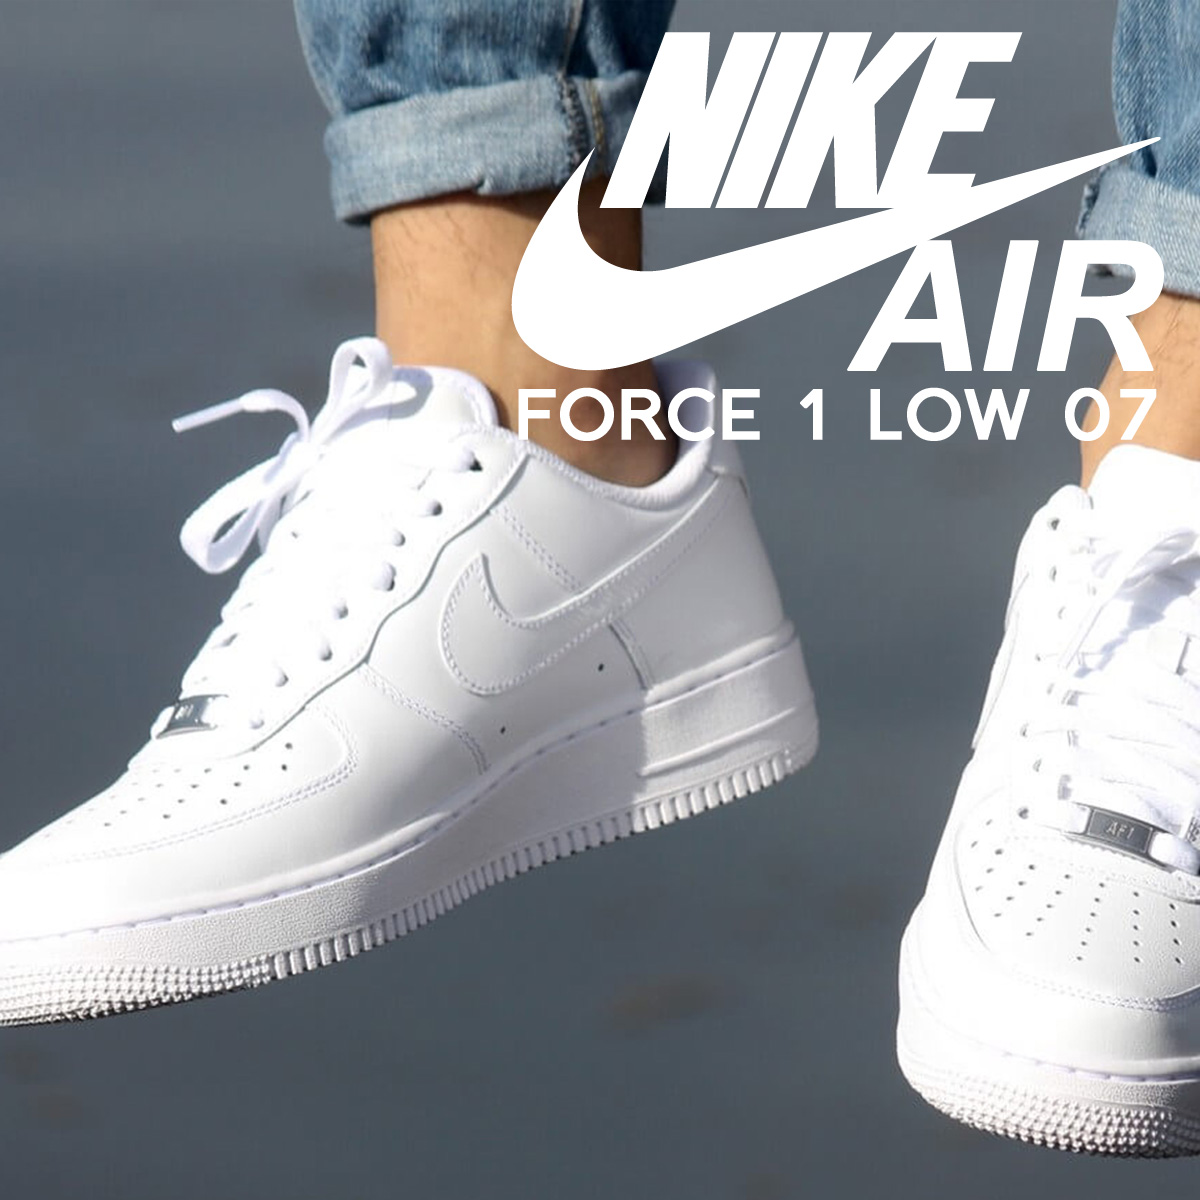 difference between air force 1 07 and low